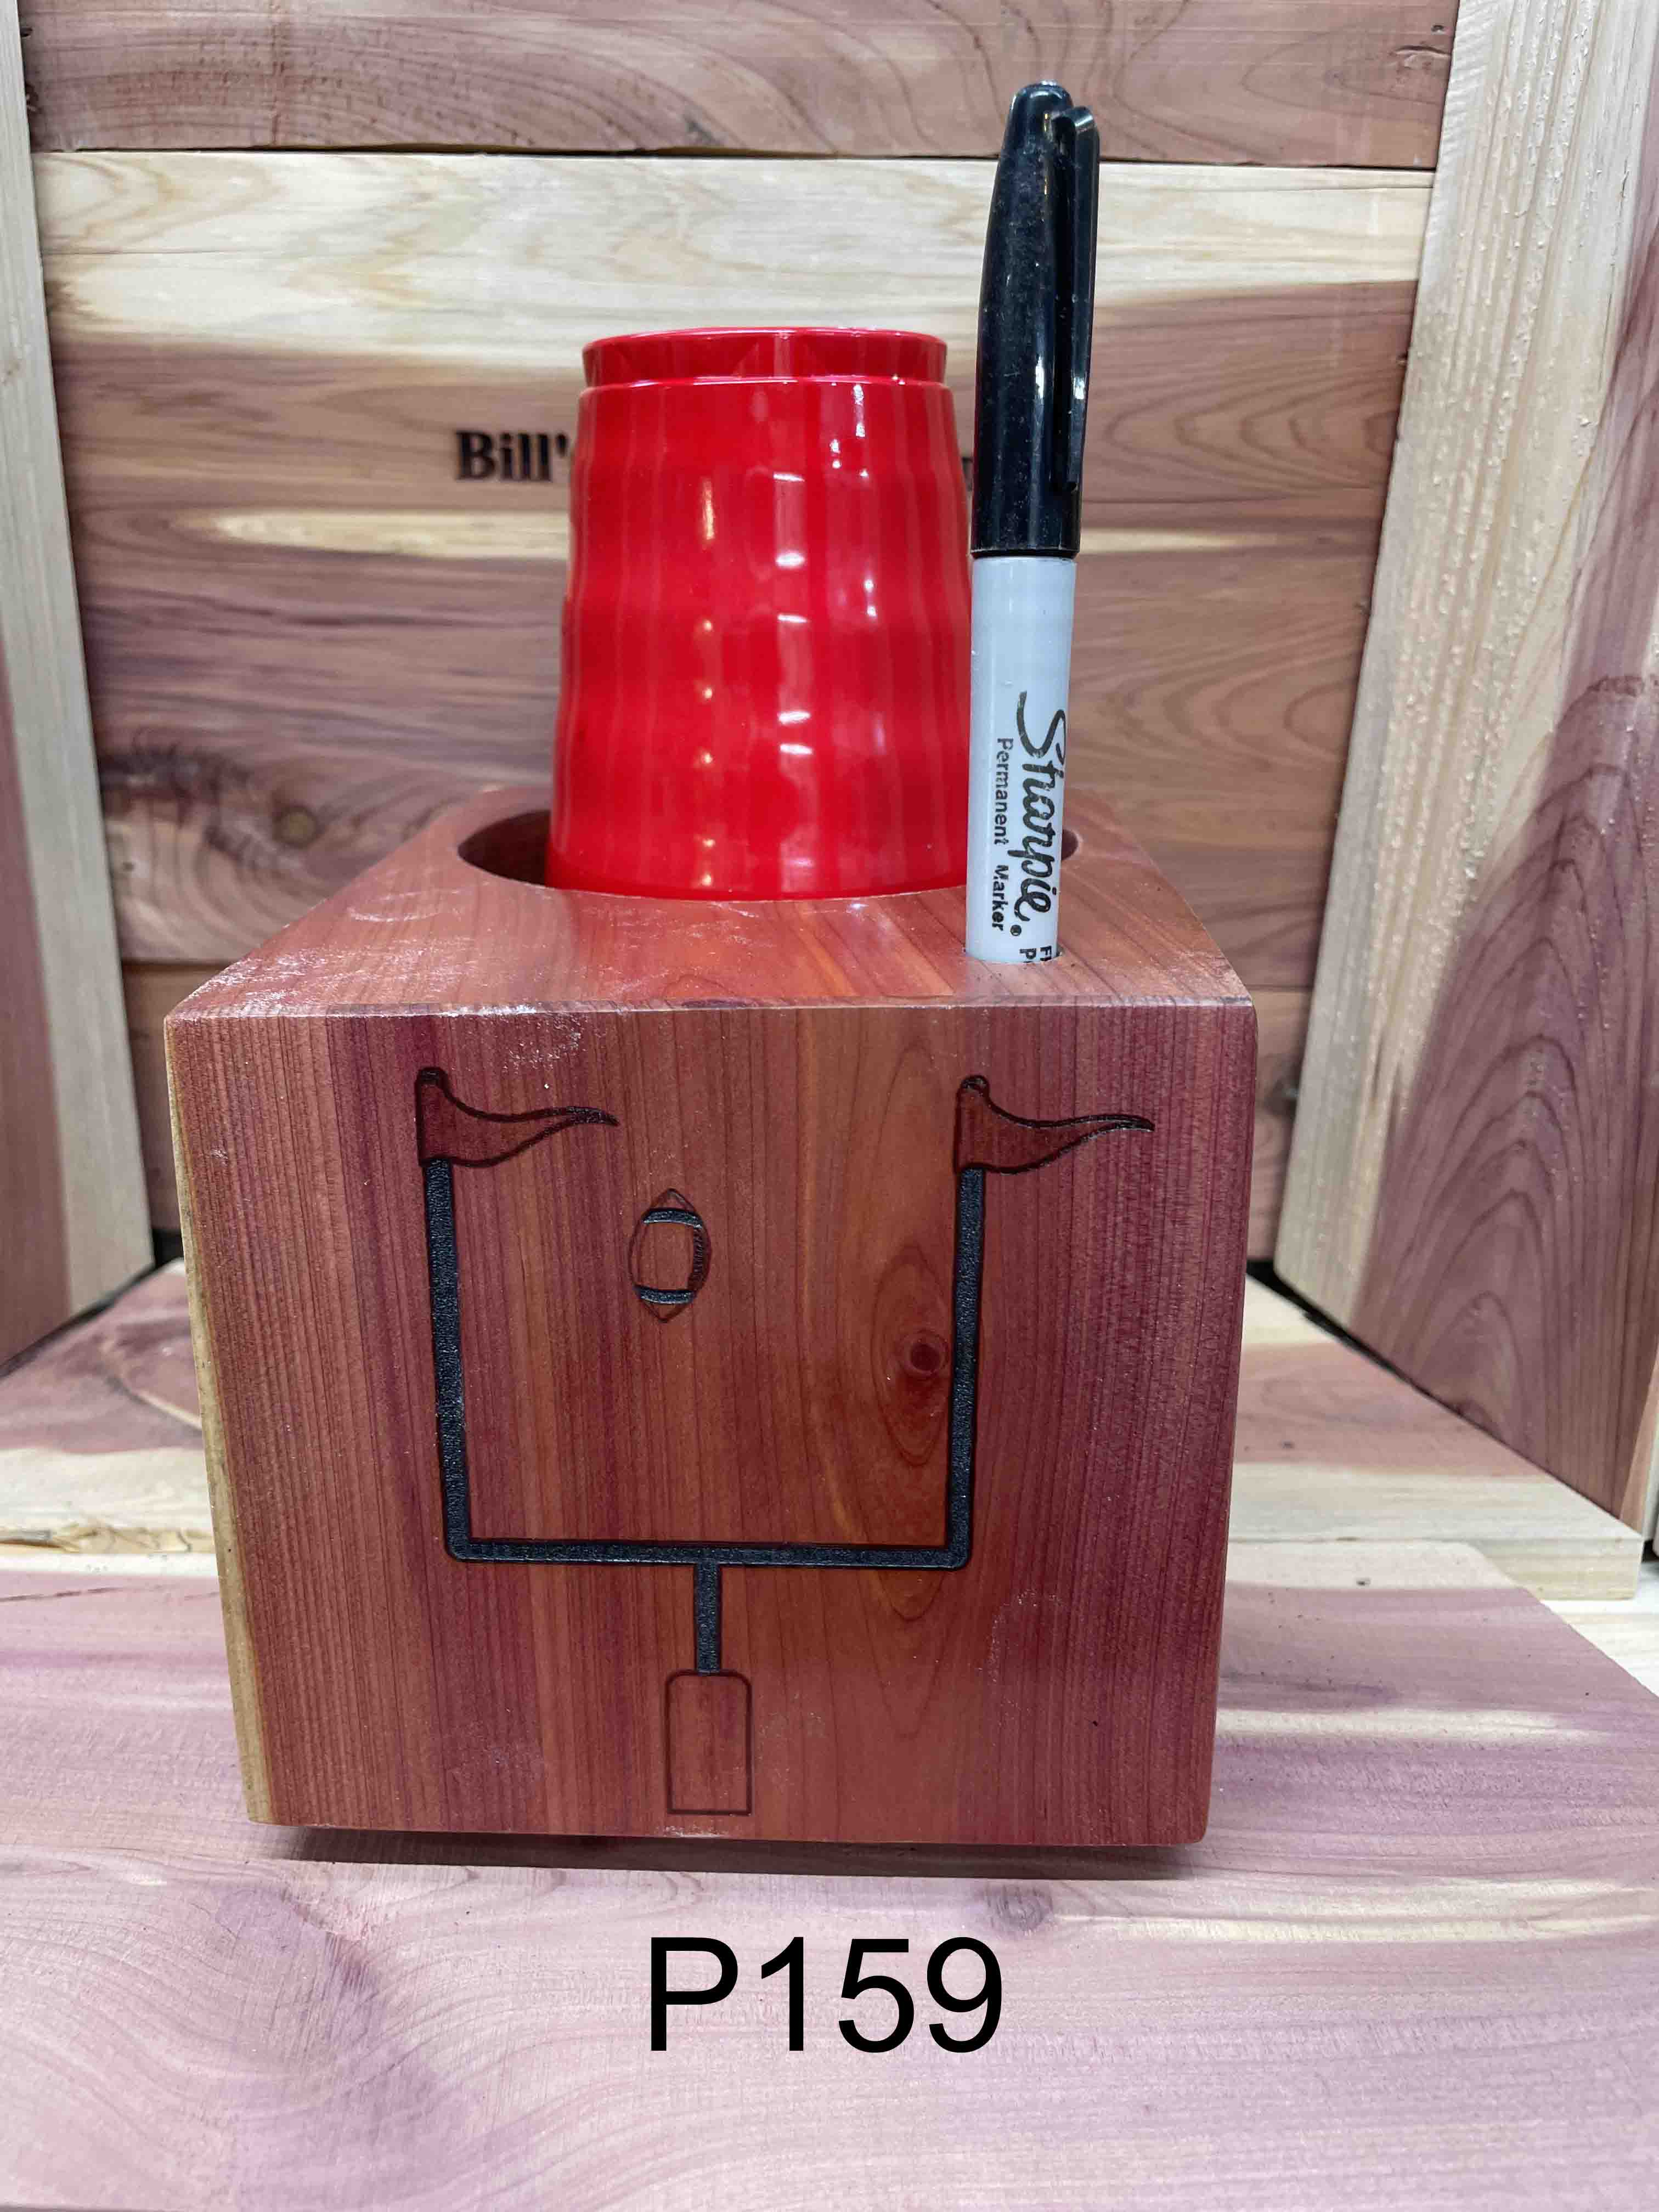 Solo Cup Holder Laser Engraved Red Cedar, "TAKE A CUP & Mark It up" Fish  Pattern"